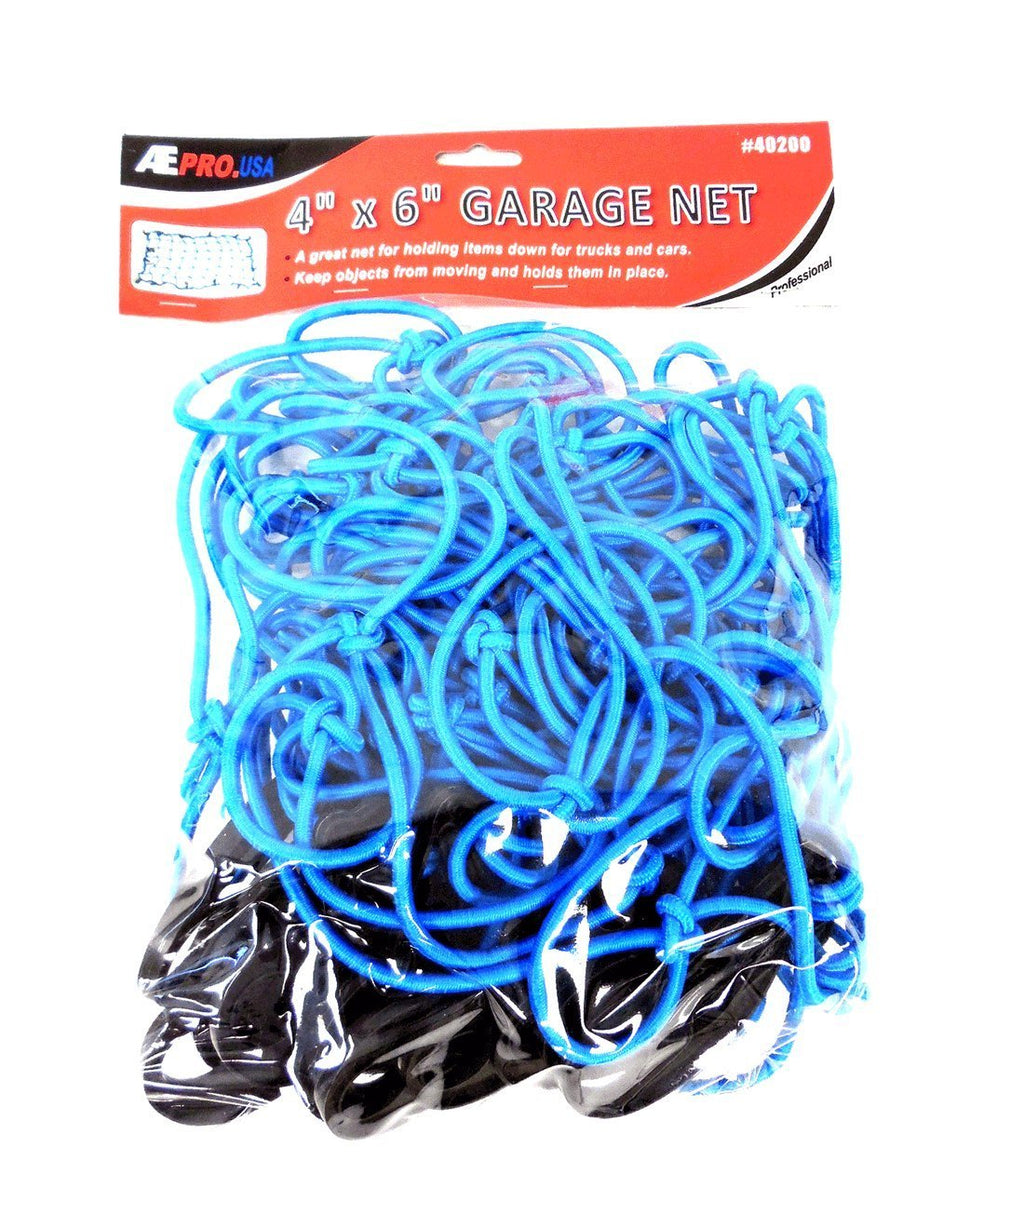  [AUSTRALIA] - Blue Color Cargo Net with 16 Durable Nylon Hooks - X Large 48" x 72"- Stretches to Approximately 80" x 108" by ATE Pro. USA. Universal Automotive Pick Up Truck Sport Car Outdoor Cycling Accessories Bu